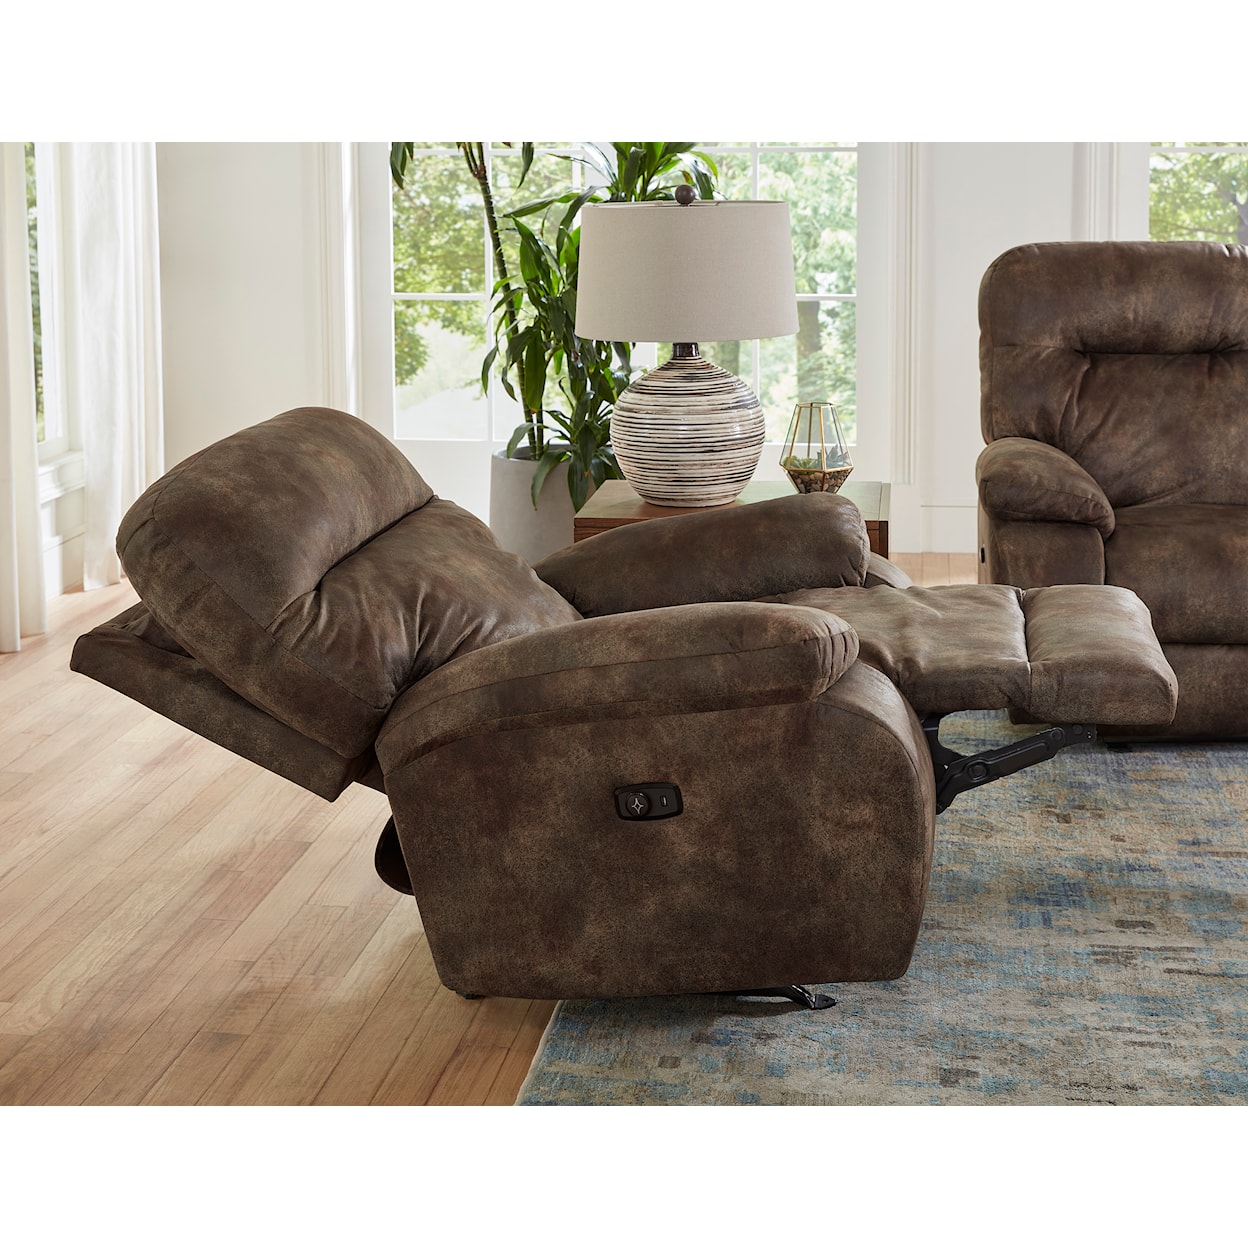 Best Home Furnishings Arial Power Rocking Recliner w/ Headrest